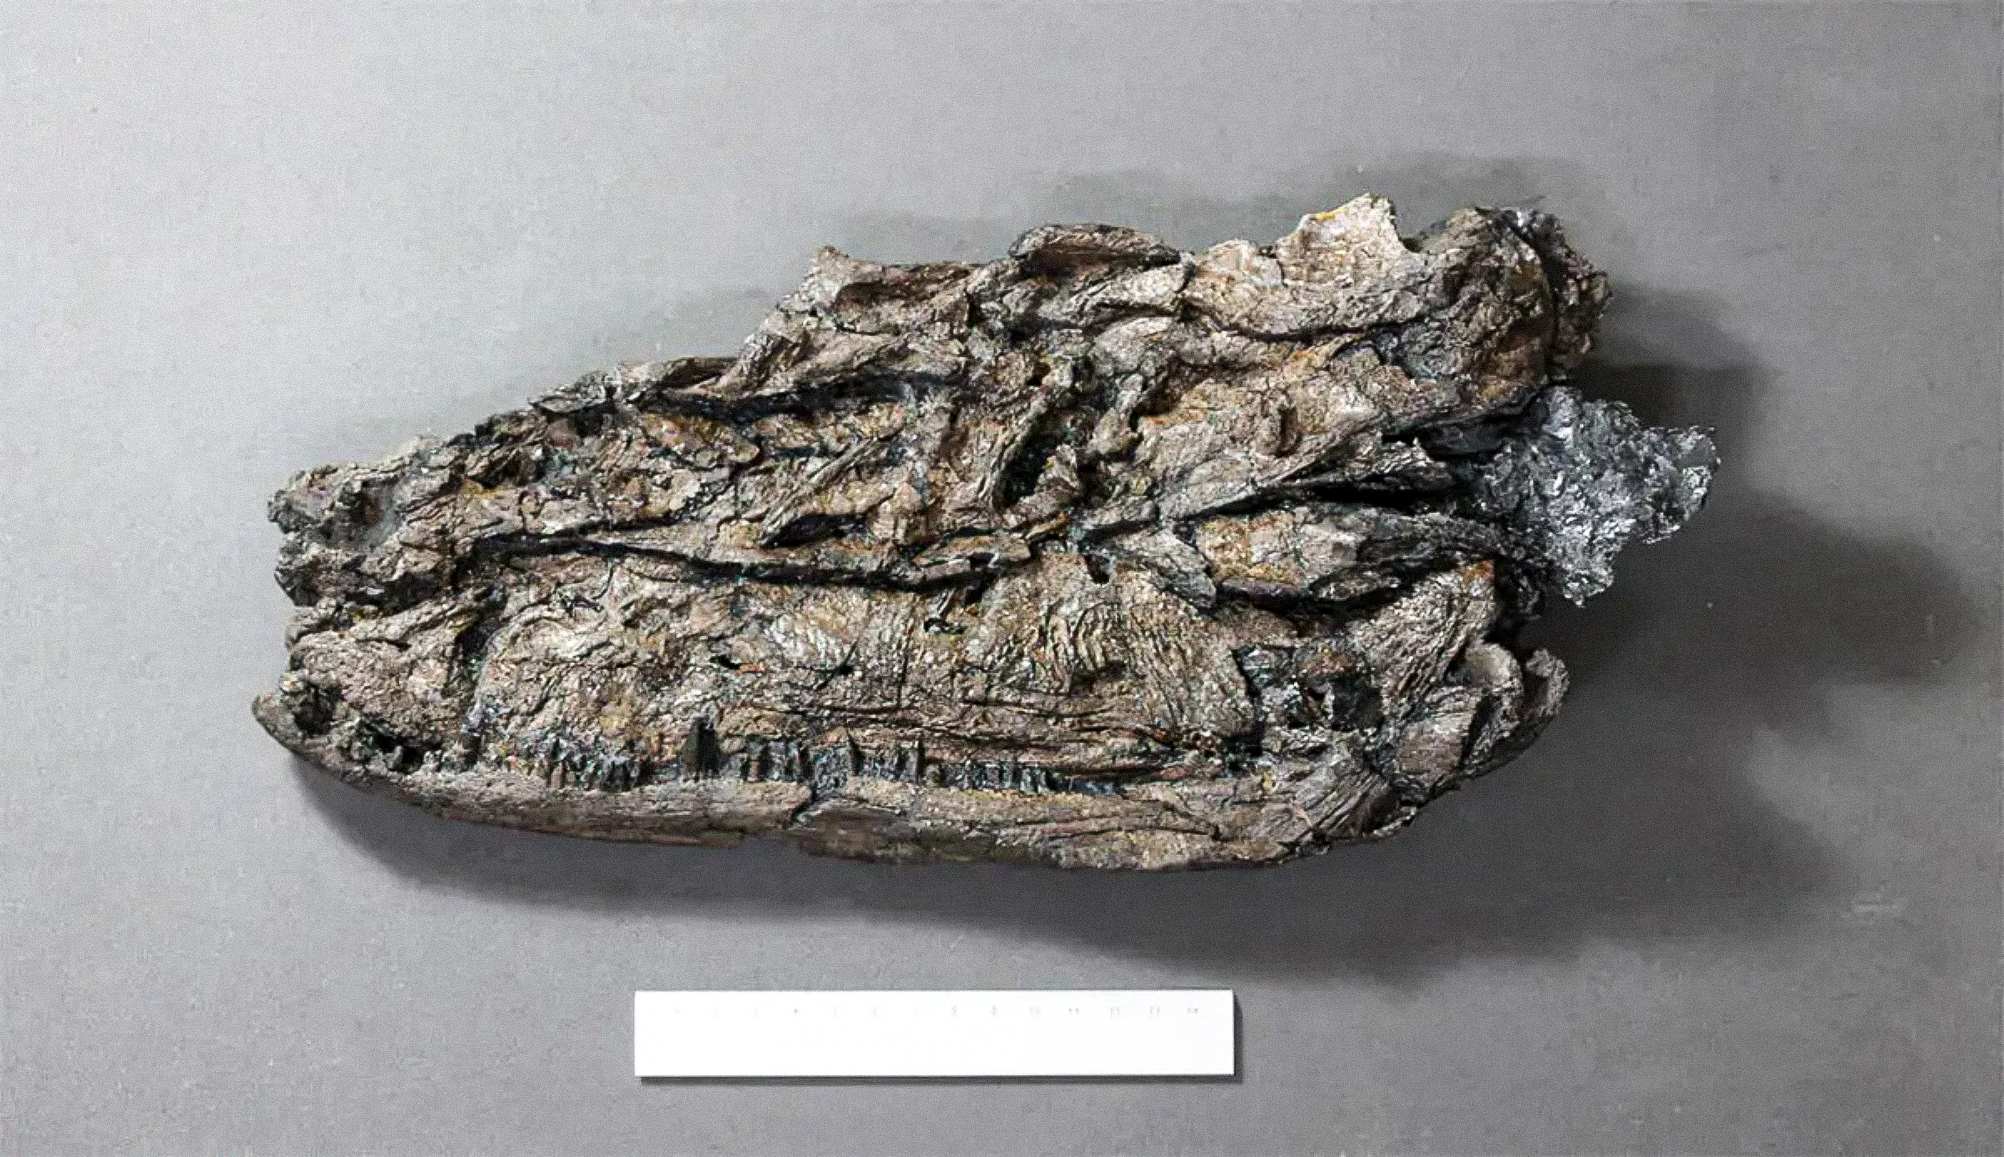 The process of fossilisation has caused specimens of Crassigyrinus to become compressed.